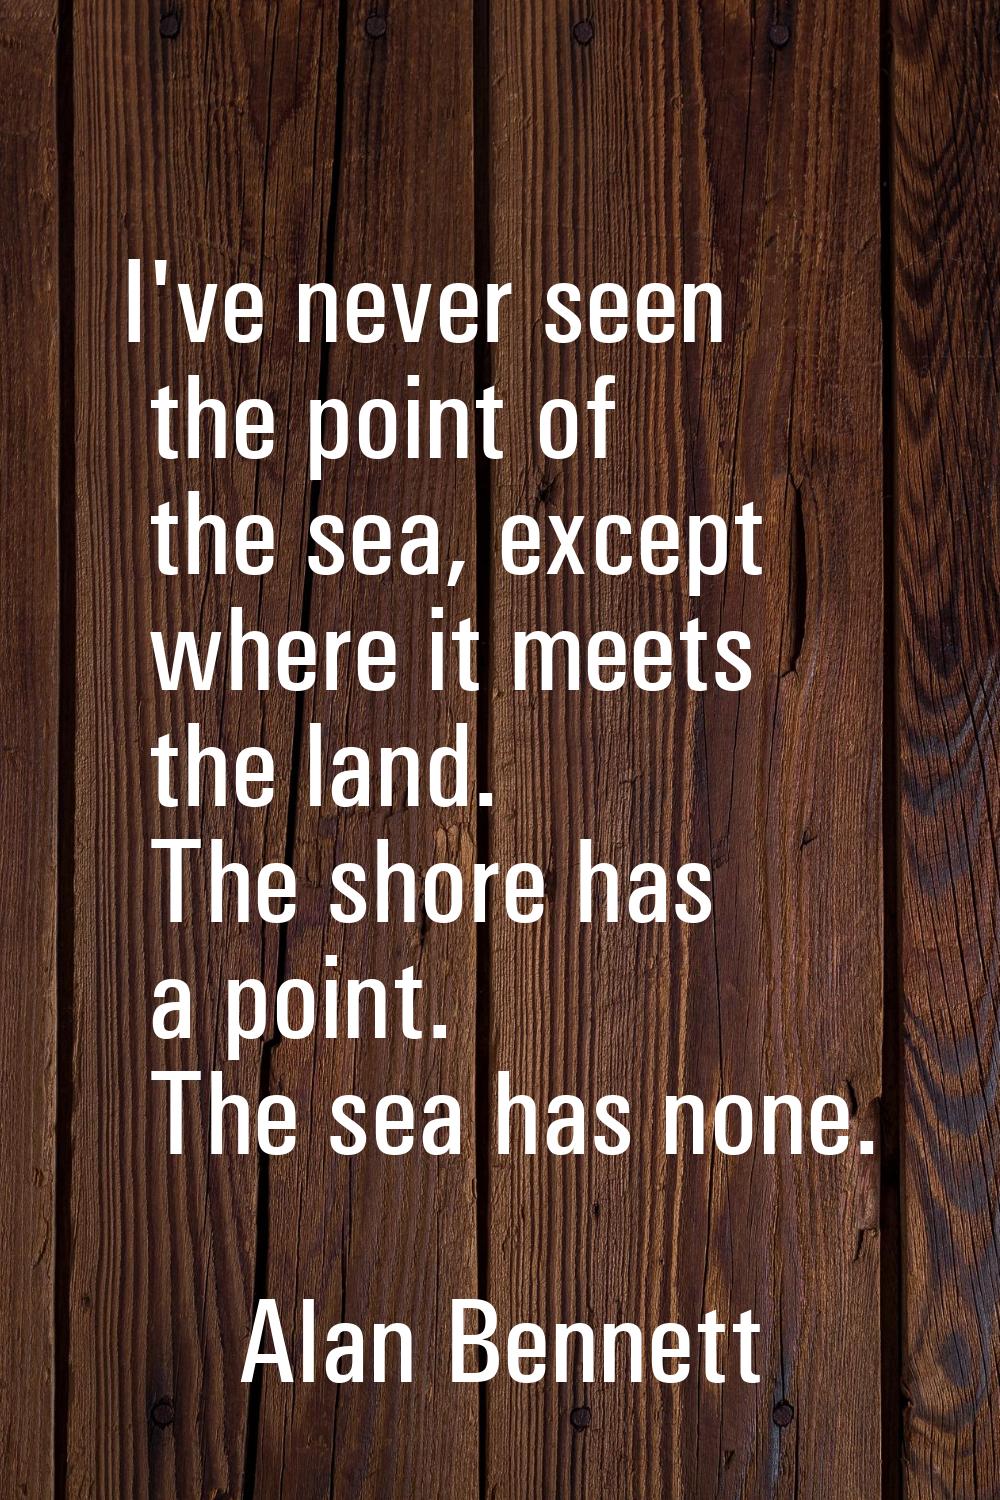 I've never seen the point of the sea, except where it meets the land. The shore has a point. The se